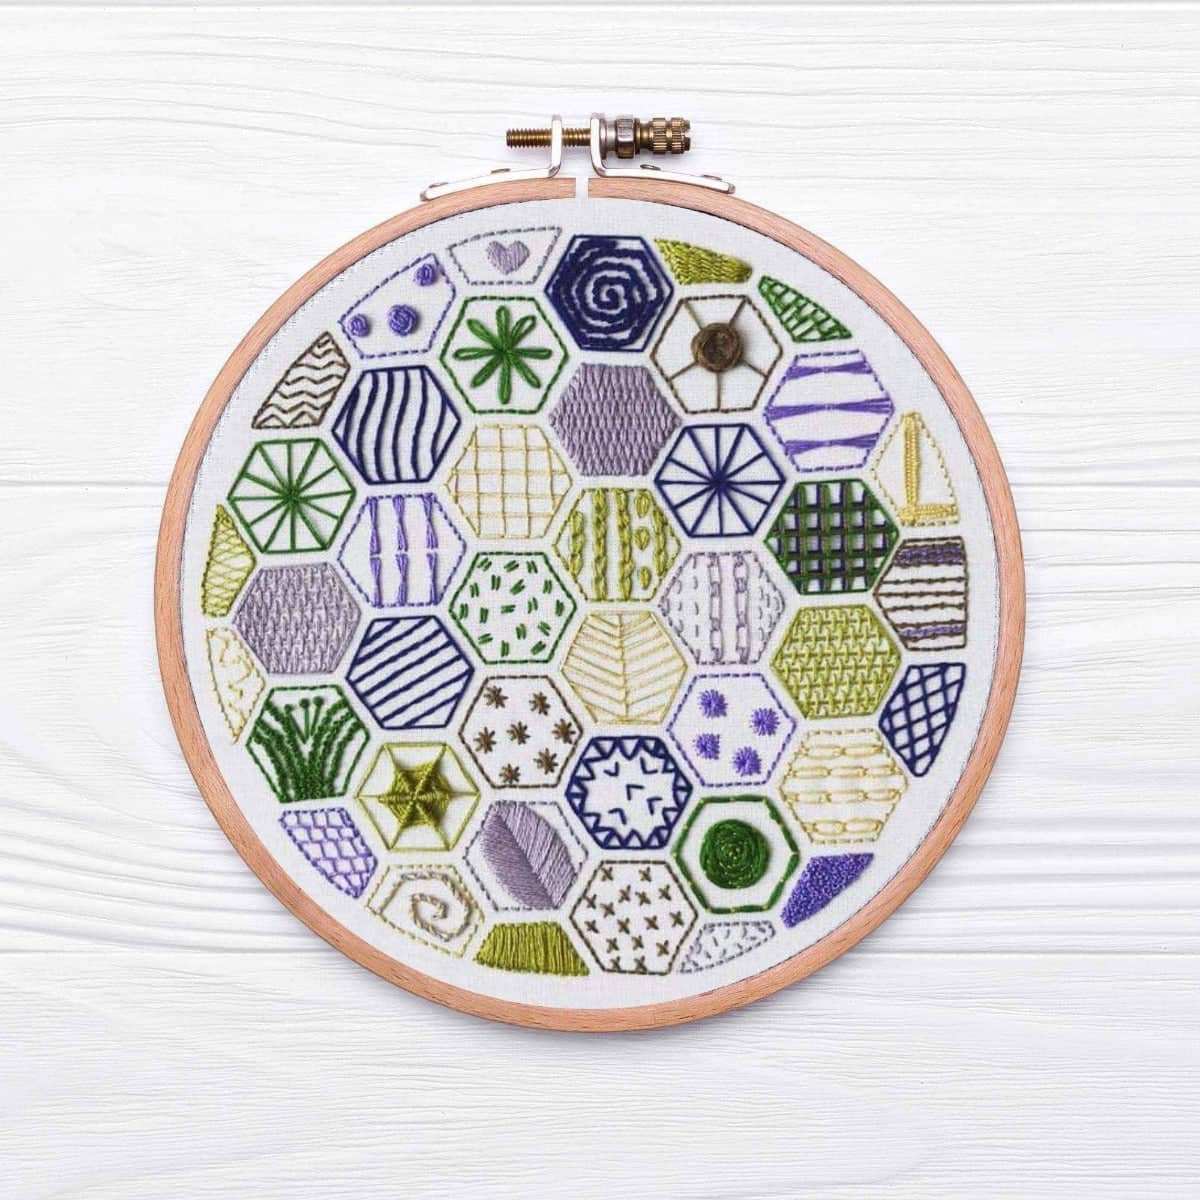 Hexagon Sampler to learn 20 hand embroidery Stitches , PDF Download , StitchDoodles , embroidery hoop kit, embroidery kits for beginners, hand embroidery, PDF pattern, unique embroidery kits , StitchDoodles , shop.stitchdoodles.com